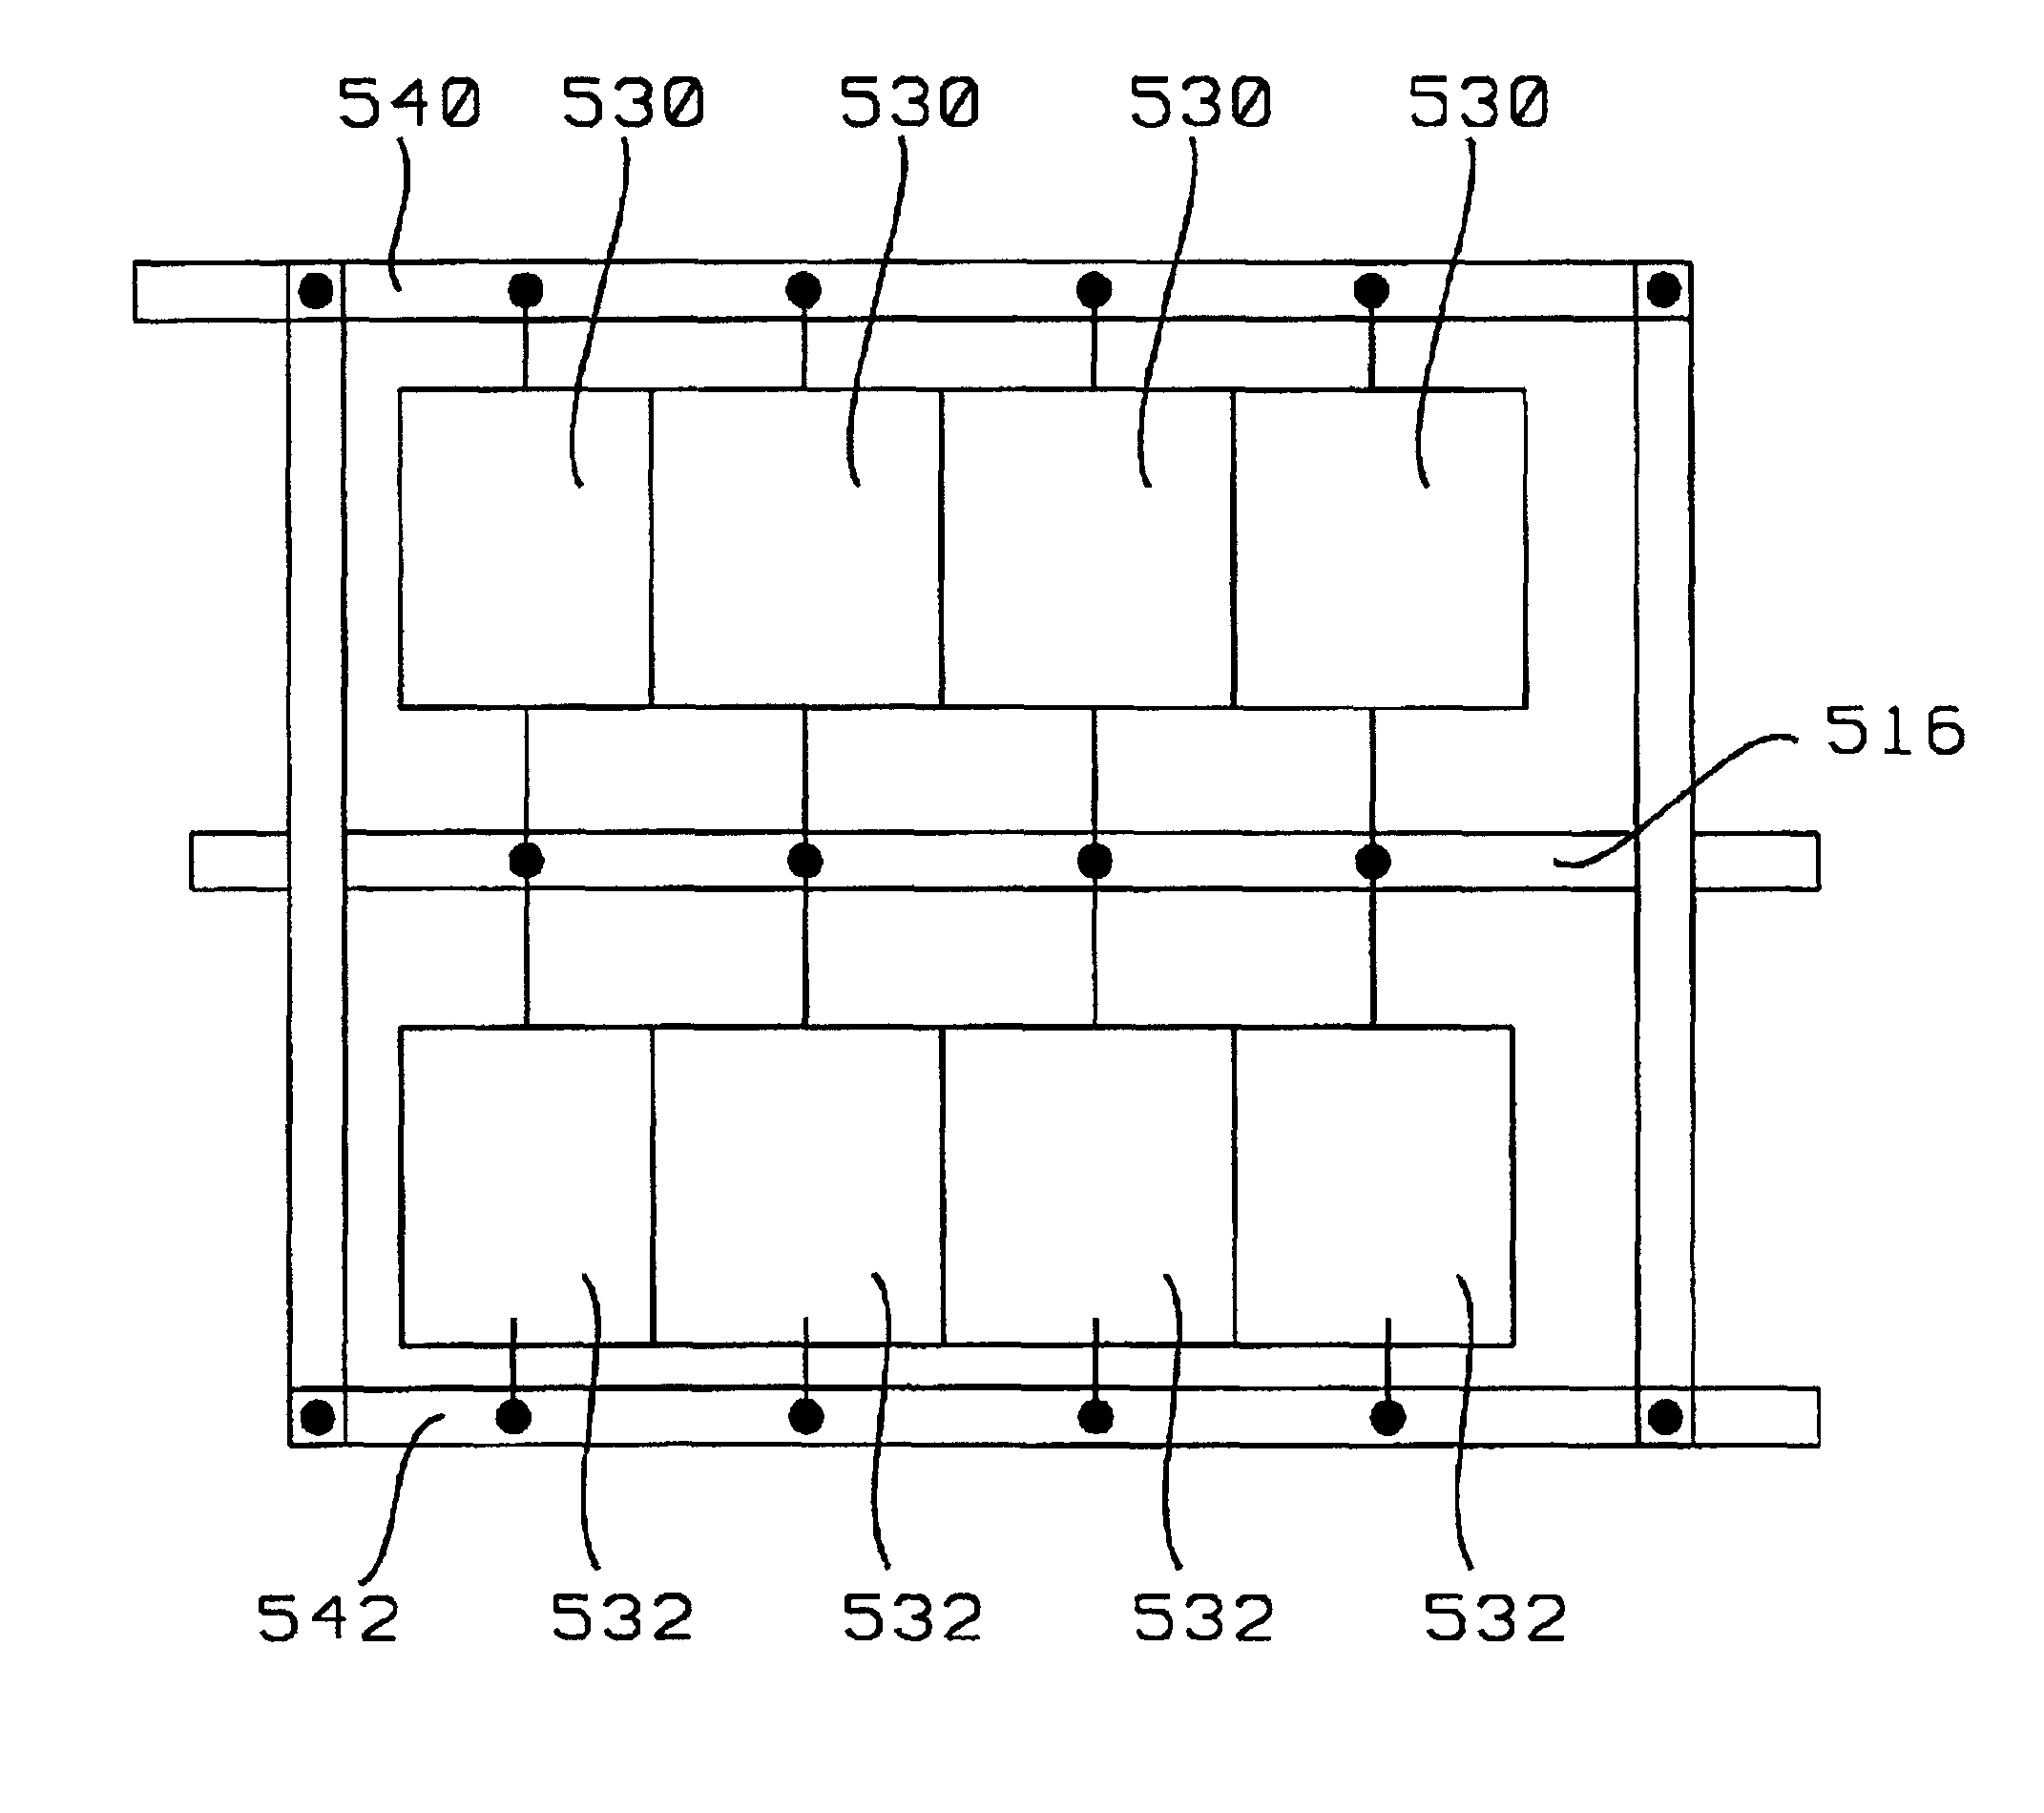 Structure of integrated circuit standard cell library for reducing power supply voltage fluctuation